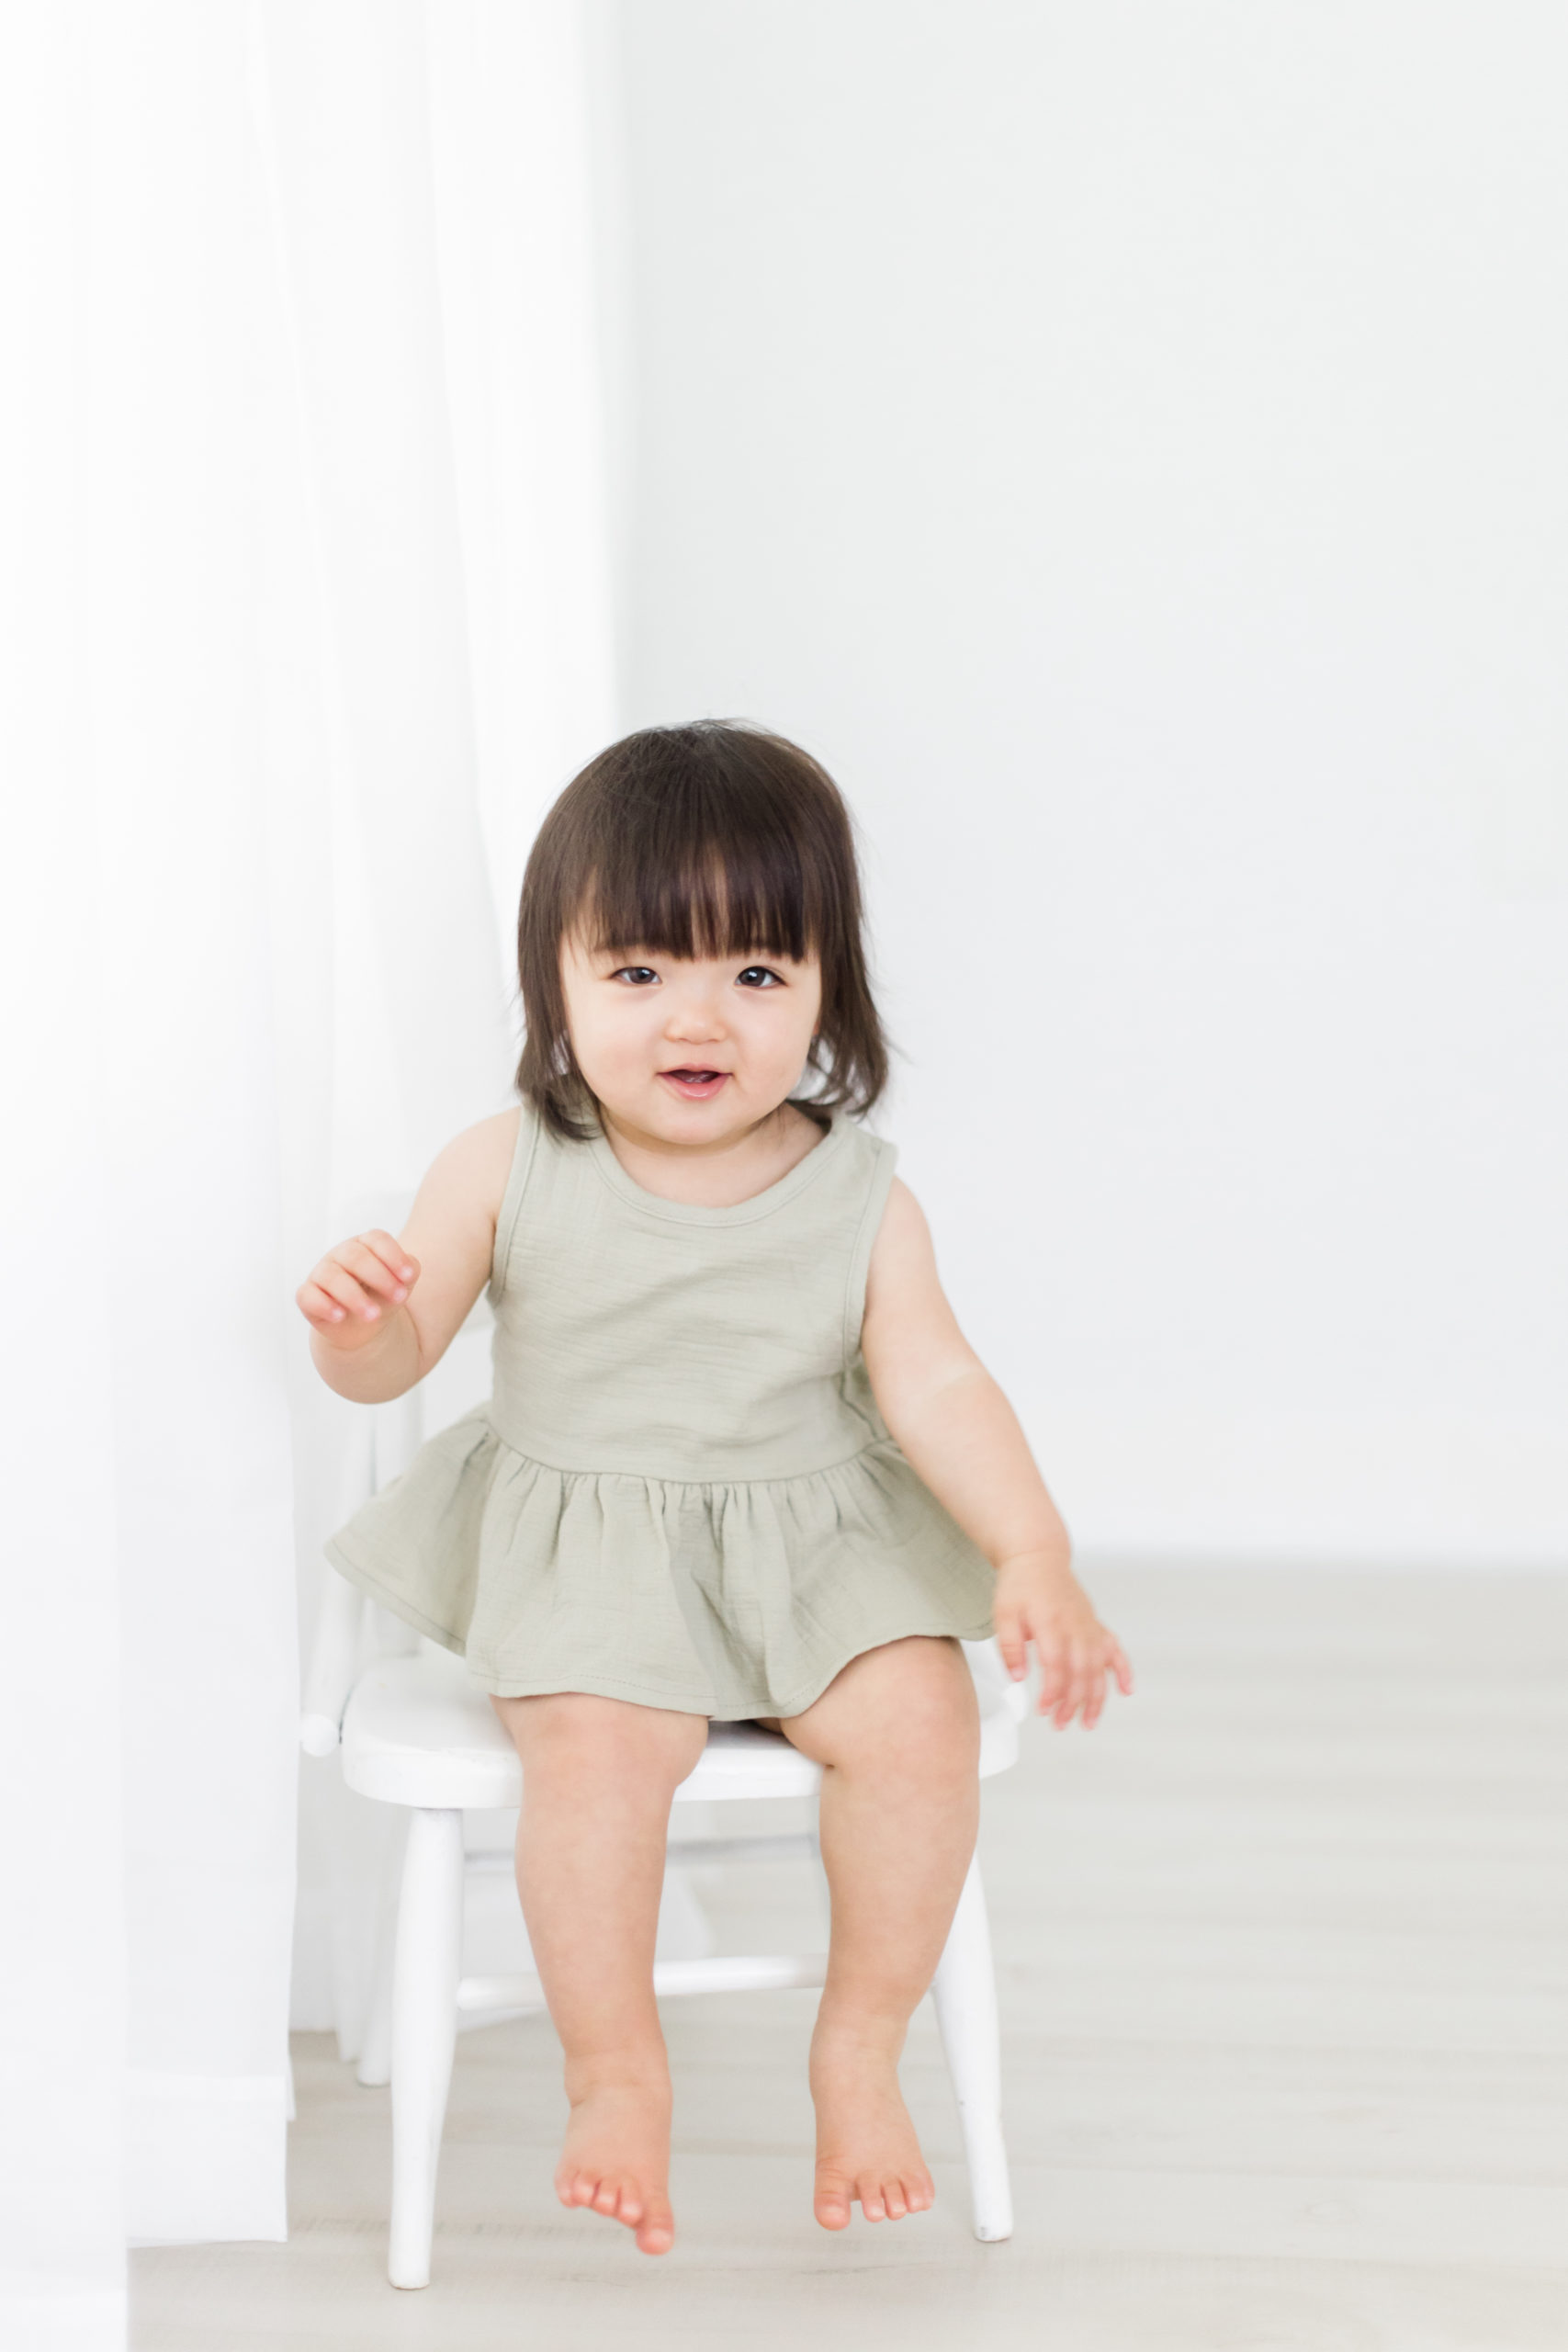 At a natural light photography studio in Houston, Texas, Monette Anne Photography captures this toddler girl sitting on a white wooden stool. toddler sitting on stool olive green toddler dress houston photographer #HoustonTexasFamilyPhotographer #MontroseTexasFamilyPhotographer #MuseumDistrictTexasPhotographer #WestUniversityTexasPhotographer #HoustonPhotographyStudio #MonetteAnnePhotography #HoustonTexasPhotographer #FirstBirthday #MontroseTexasPhotographer #SmashCake